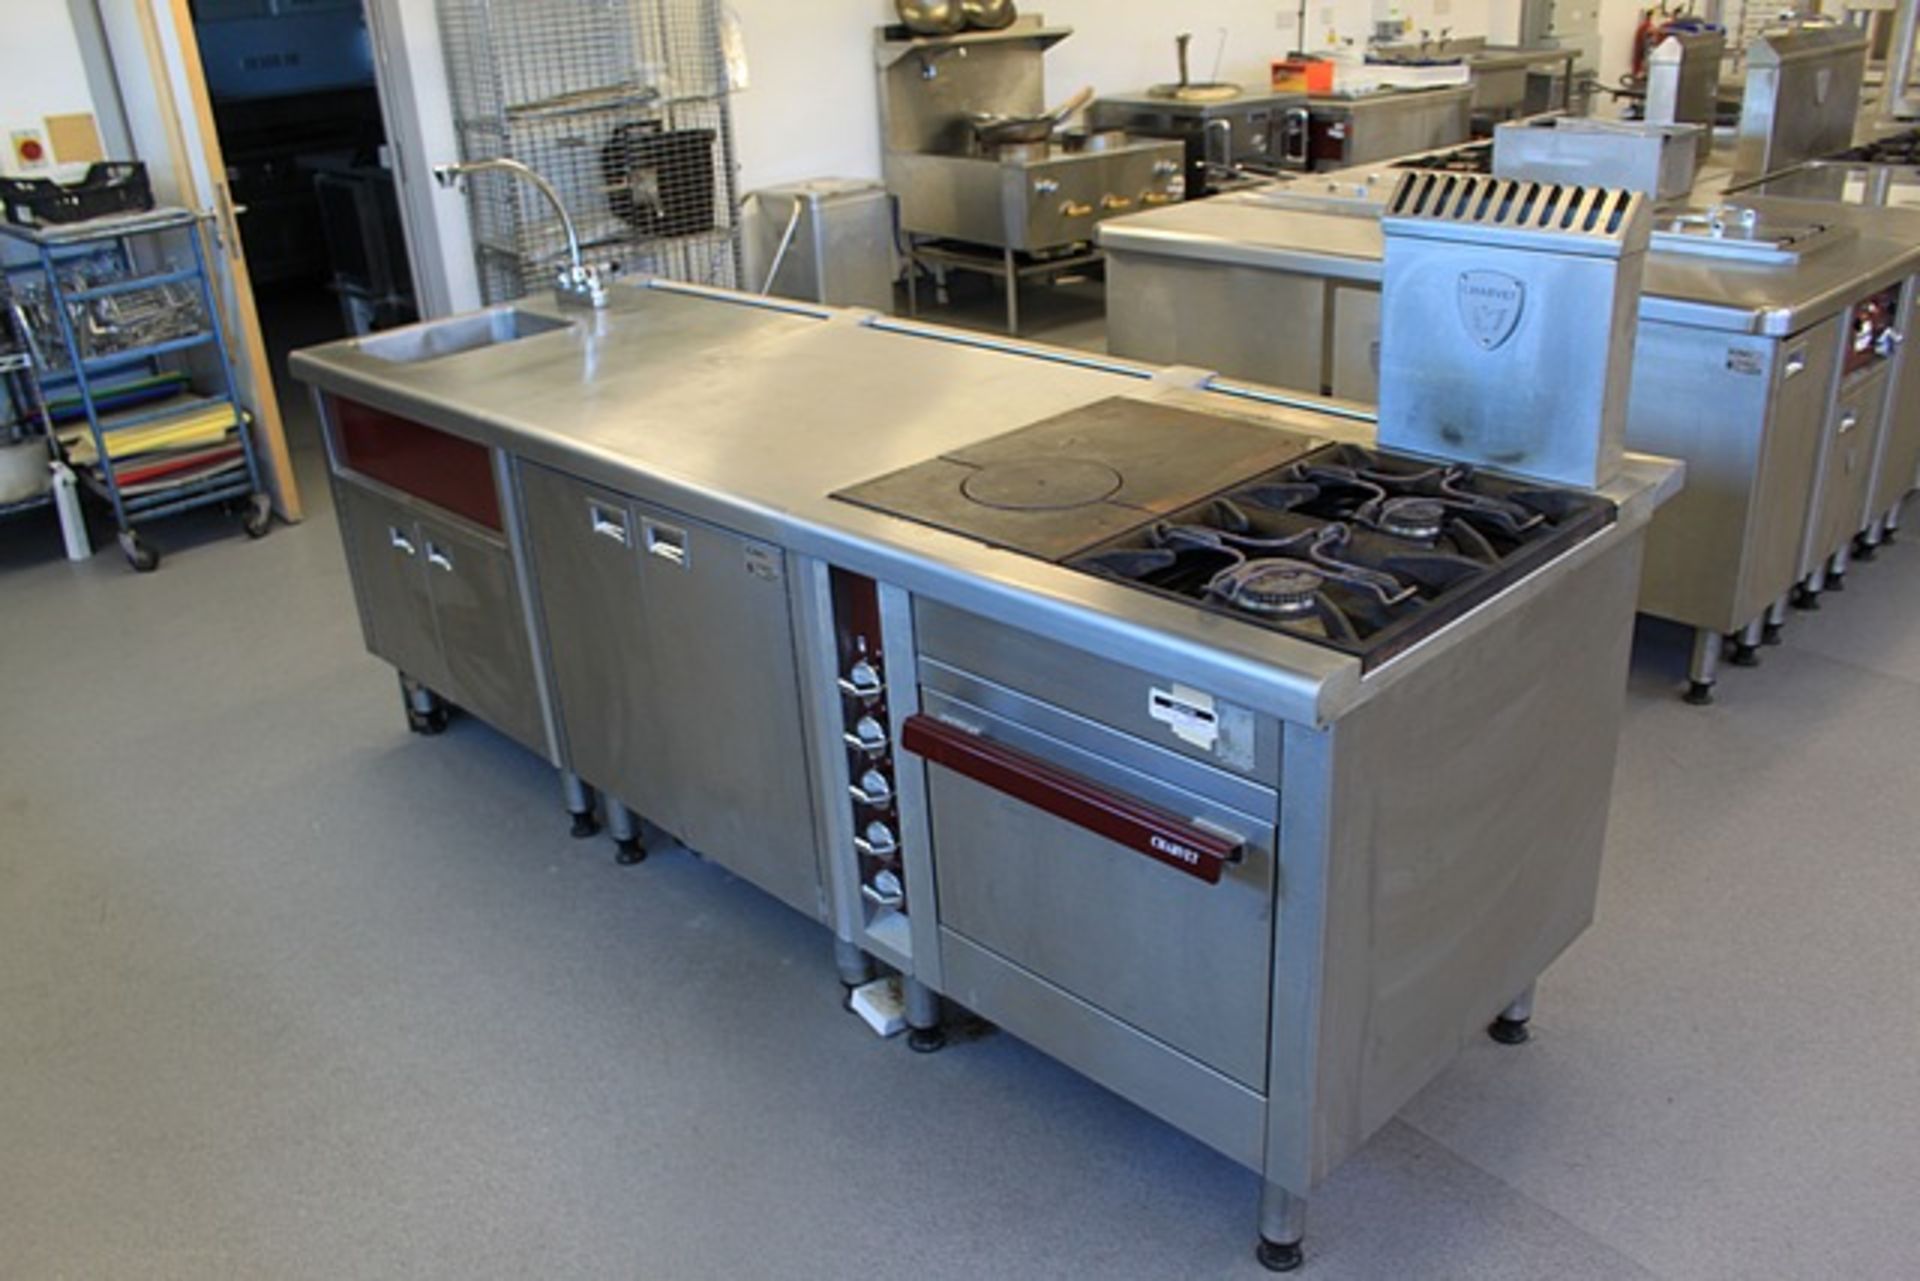 Charvet Pro 800 customised modular heavy-duty gas cooking range 18/10 steel overall 2550 x 900mm - Image 2 of 2